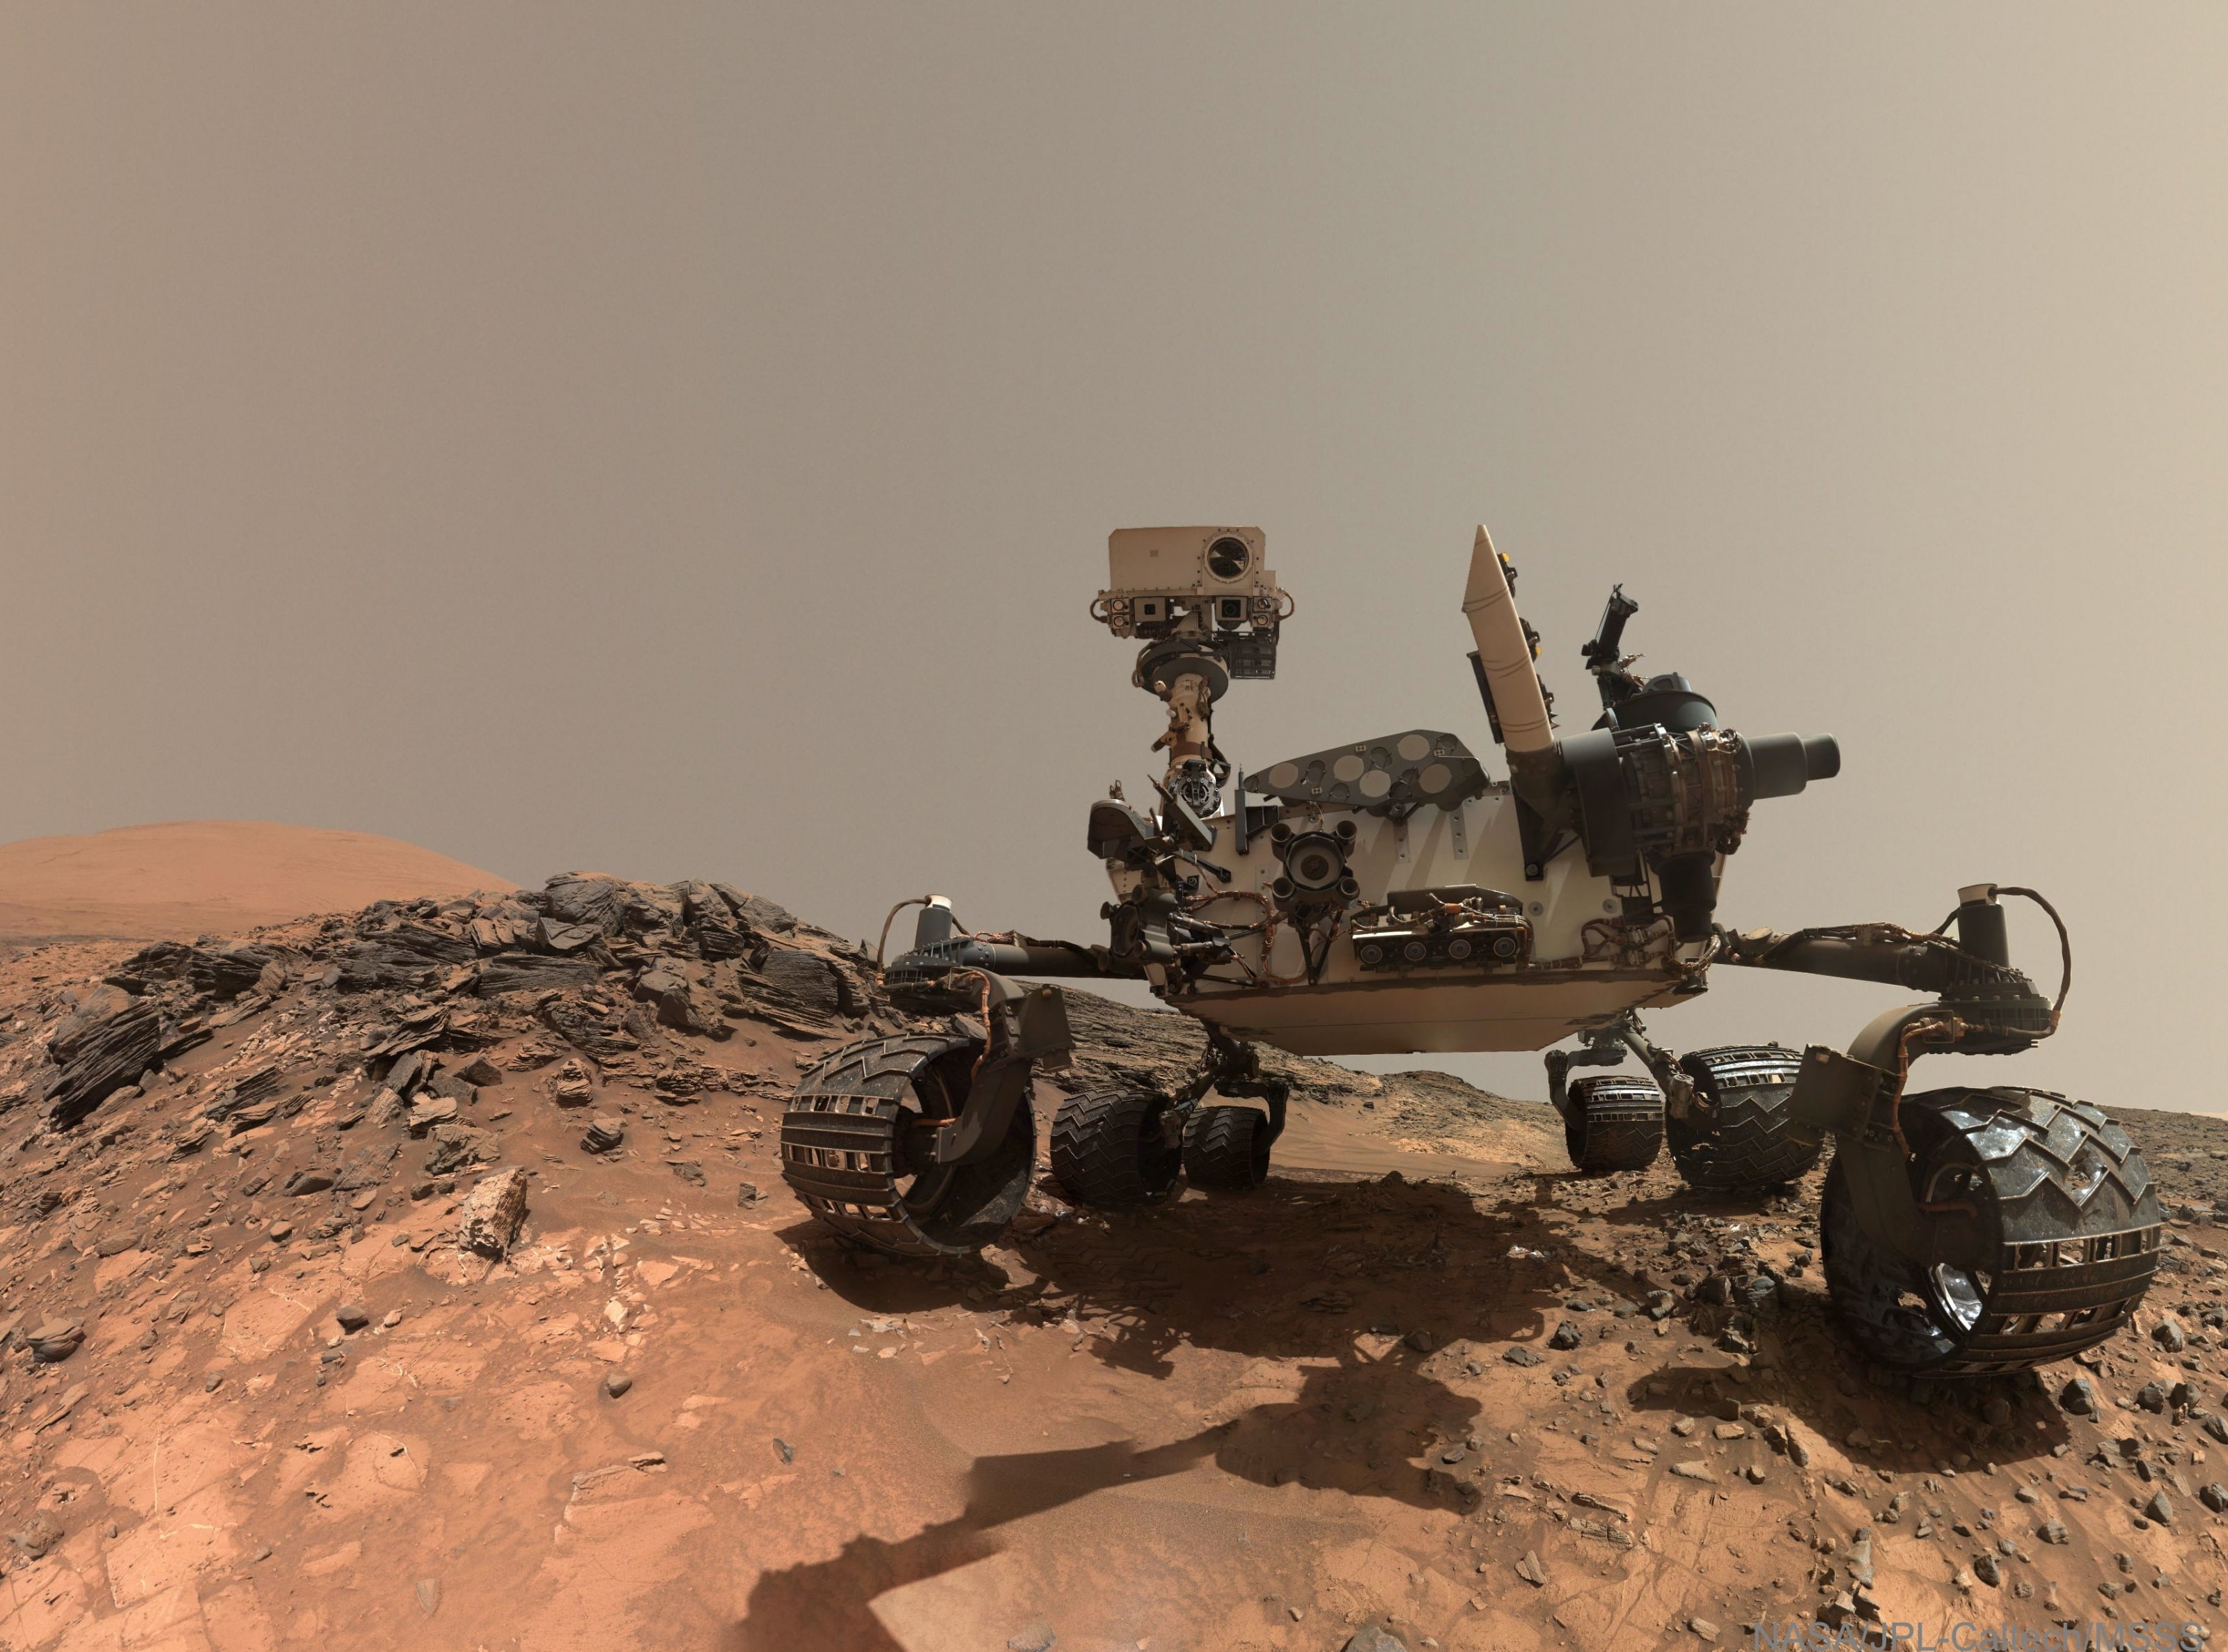 Selfie on Mars, Space, Planet, Explorer, Rocks, Rover, Discovery